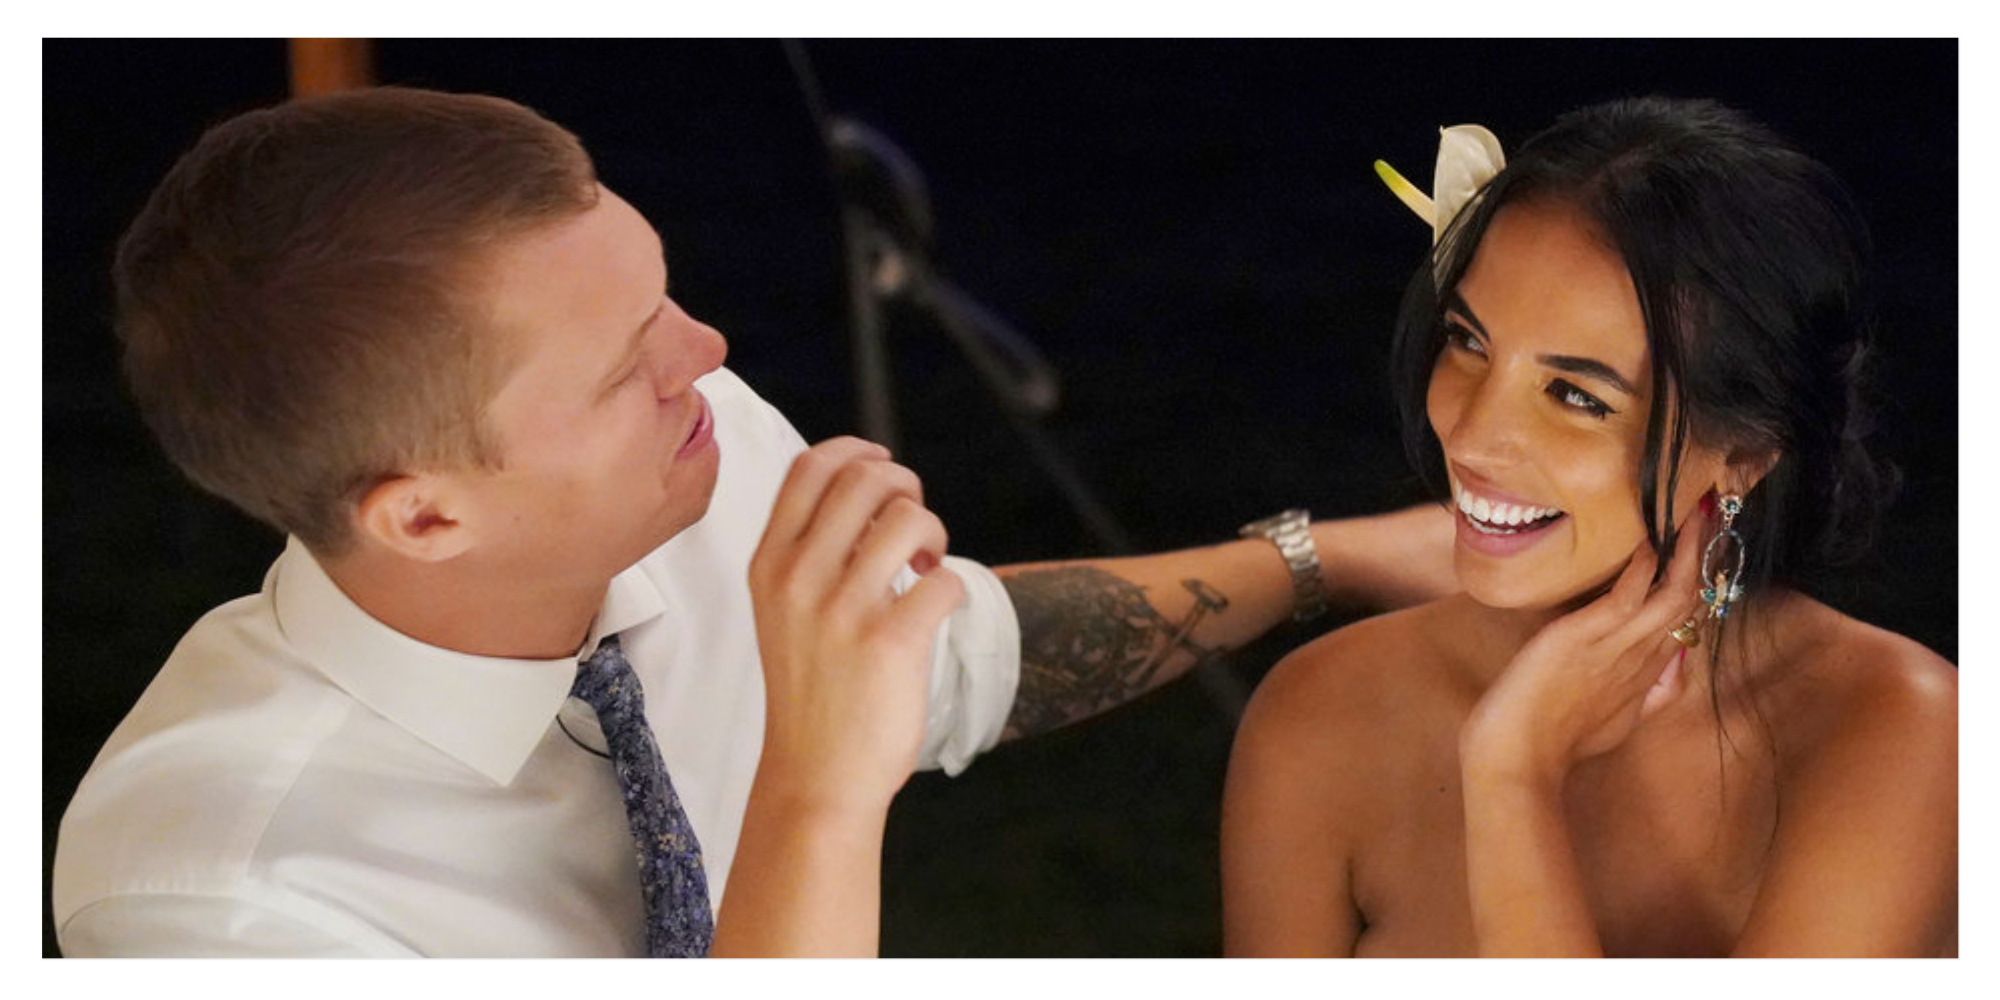 Robert Sieber, Danielle Olivera smile at each other during a 'Summer House' cast wedding